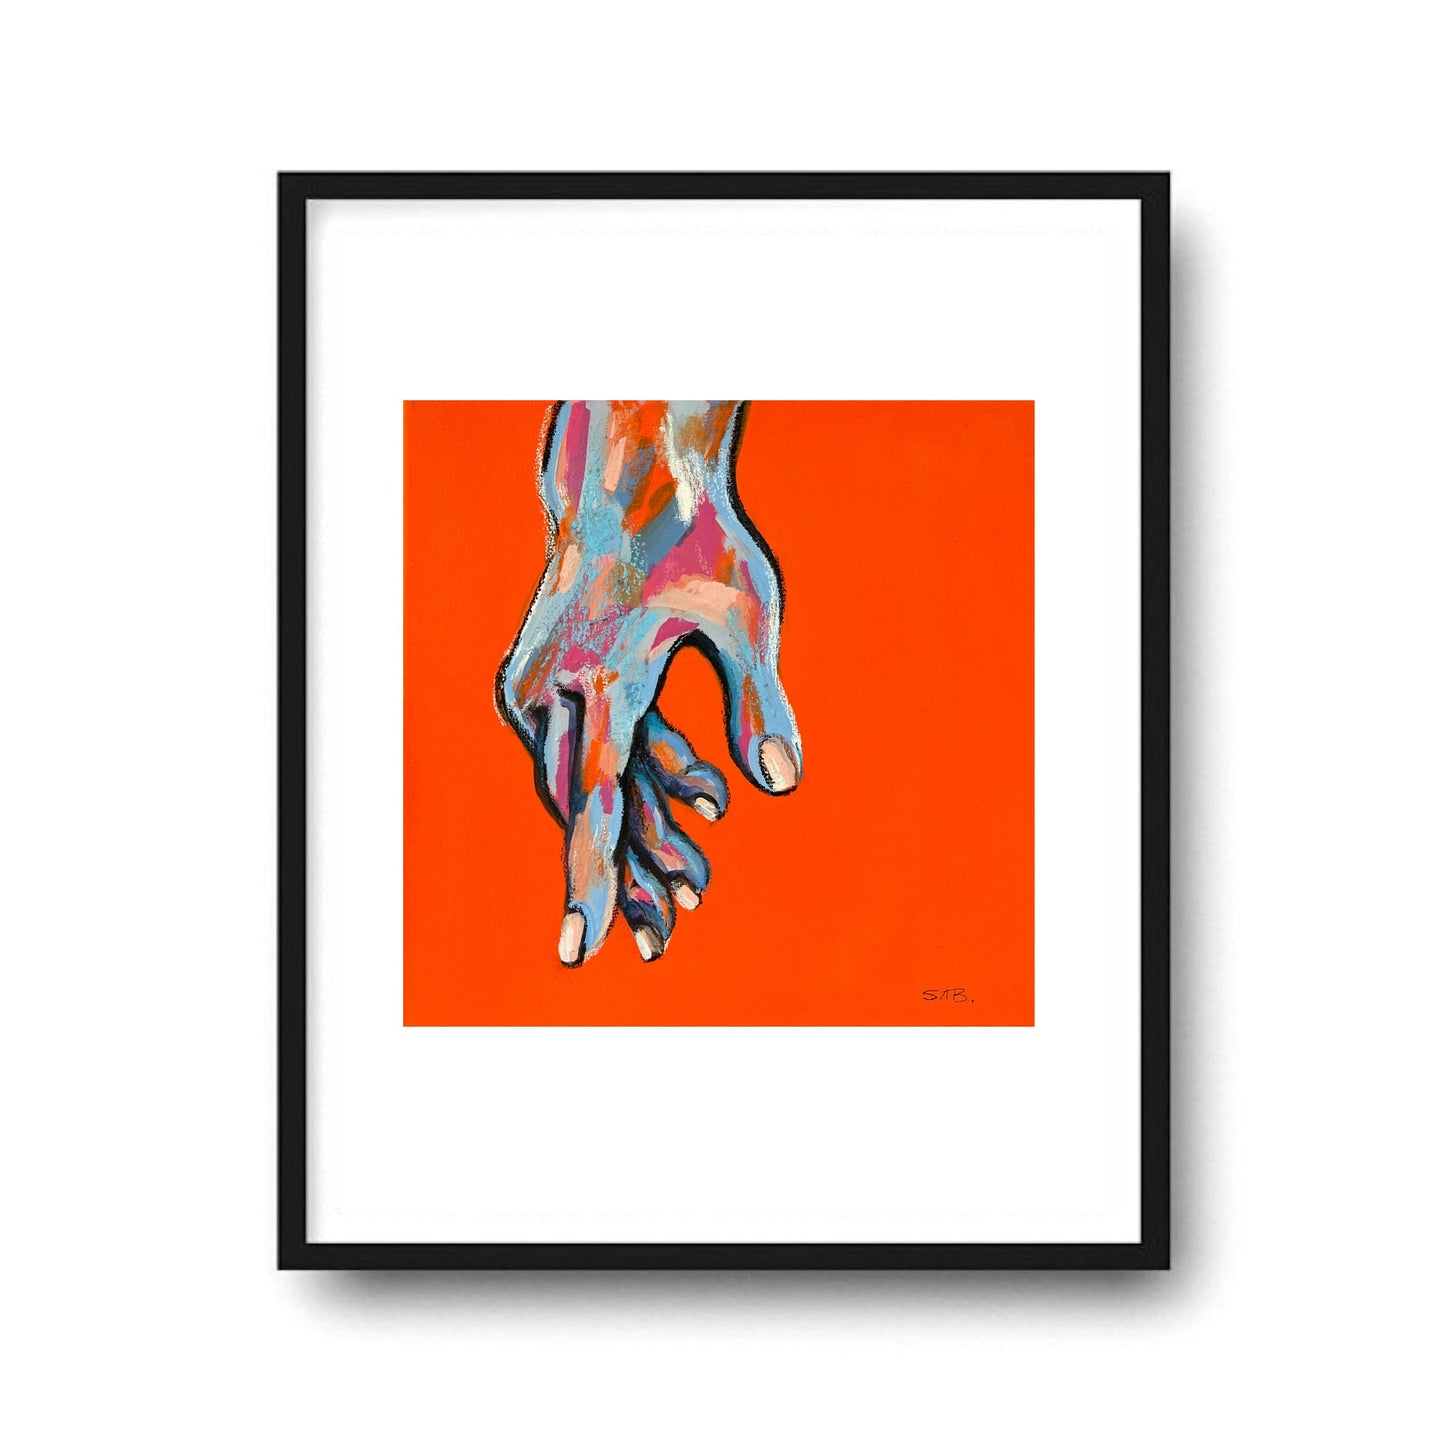 Abstract hand body painting wall decor original canvas 8x10 painting bright LGBTQ pride